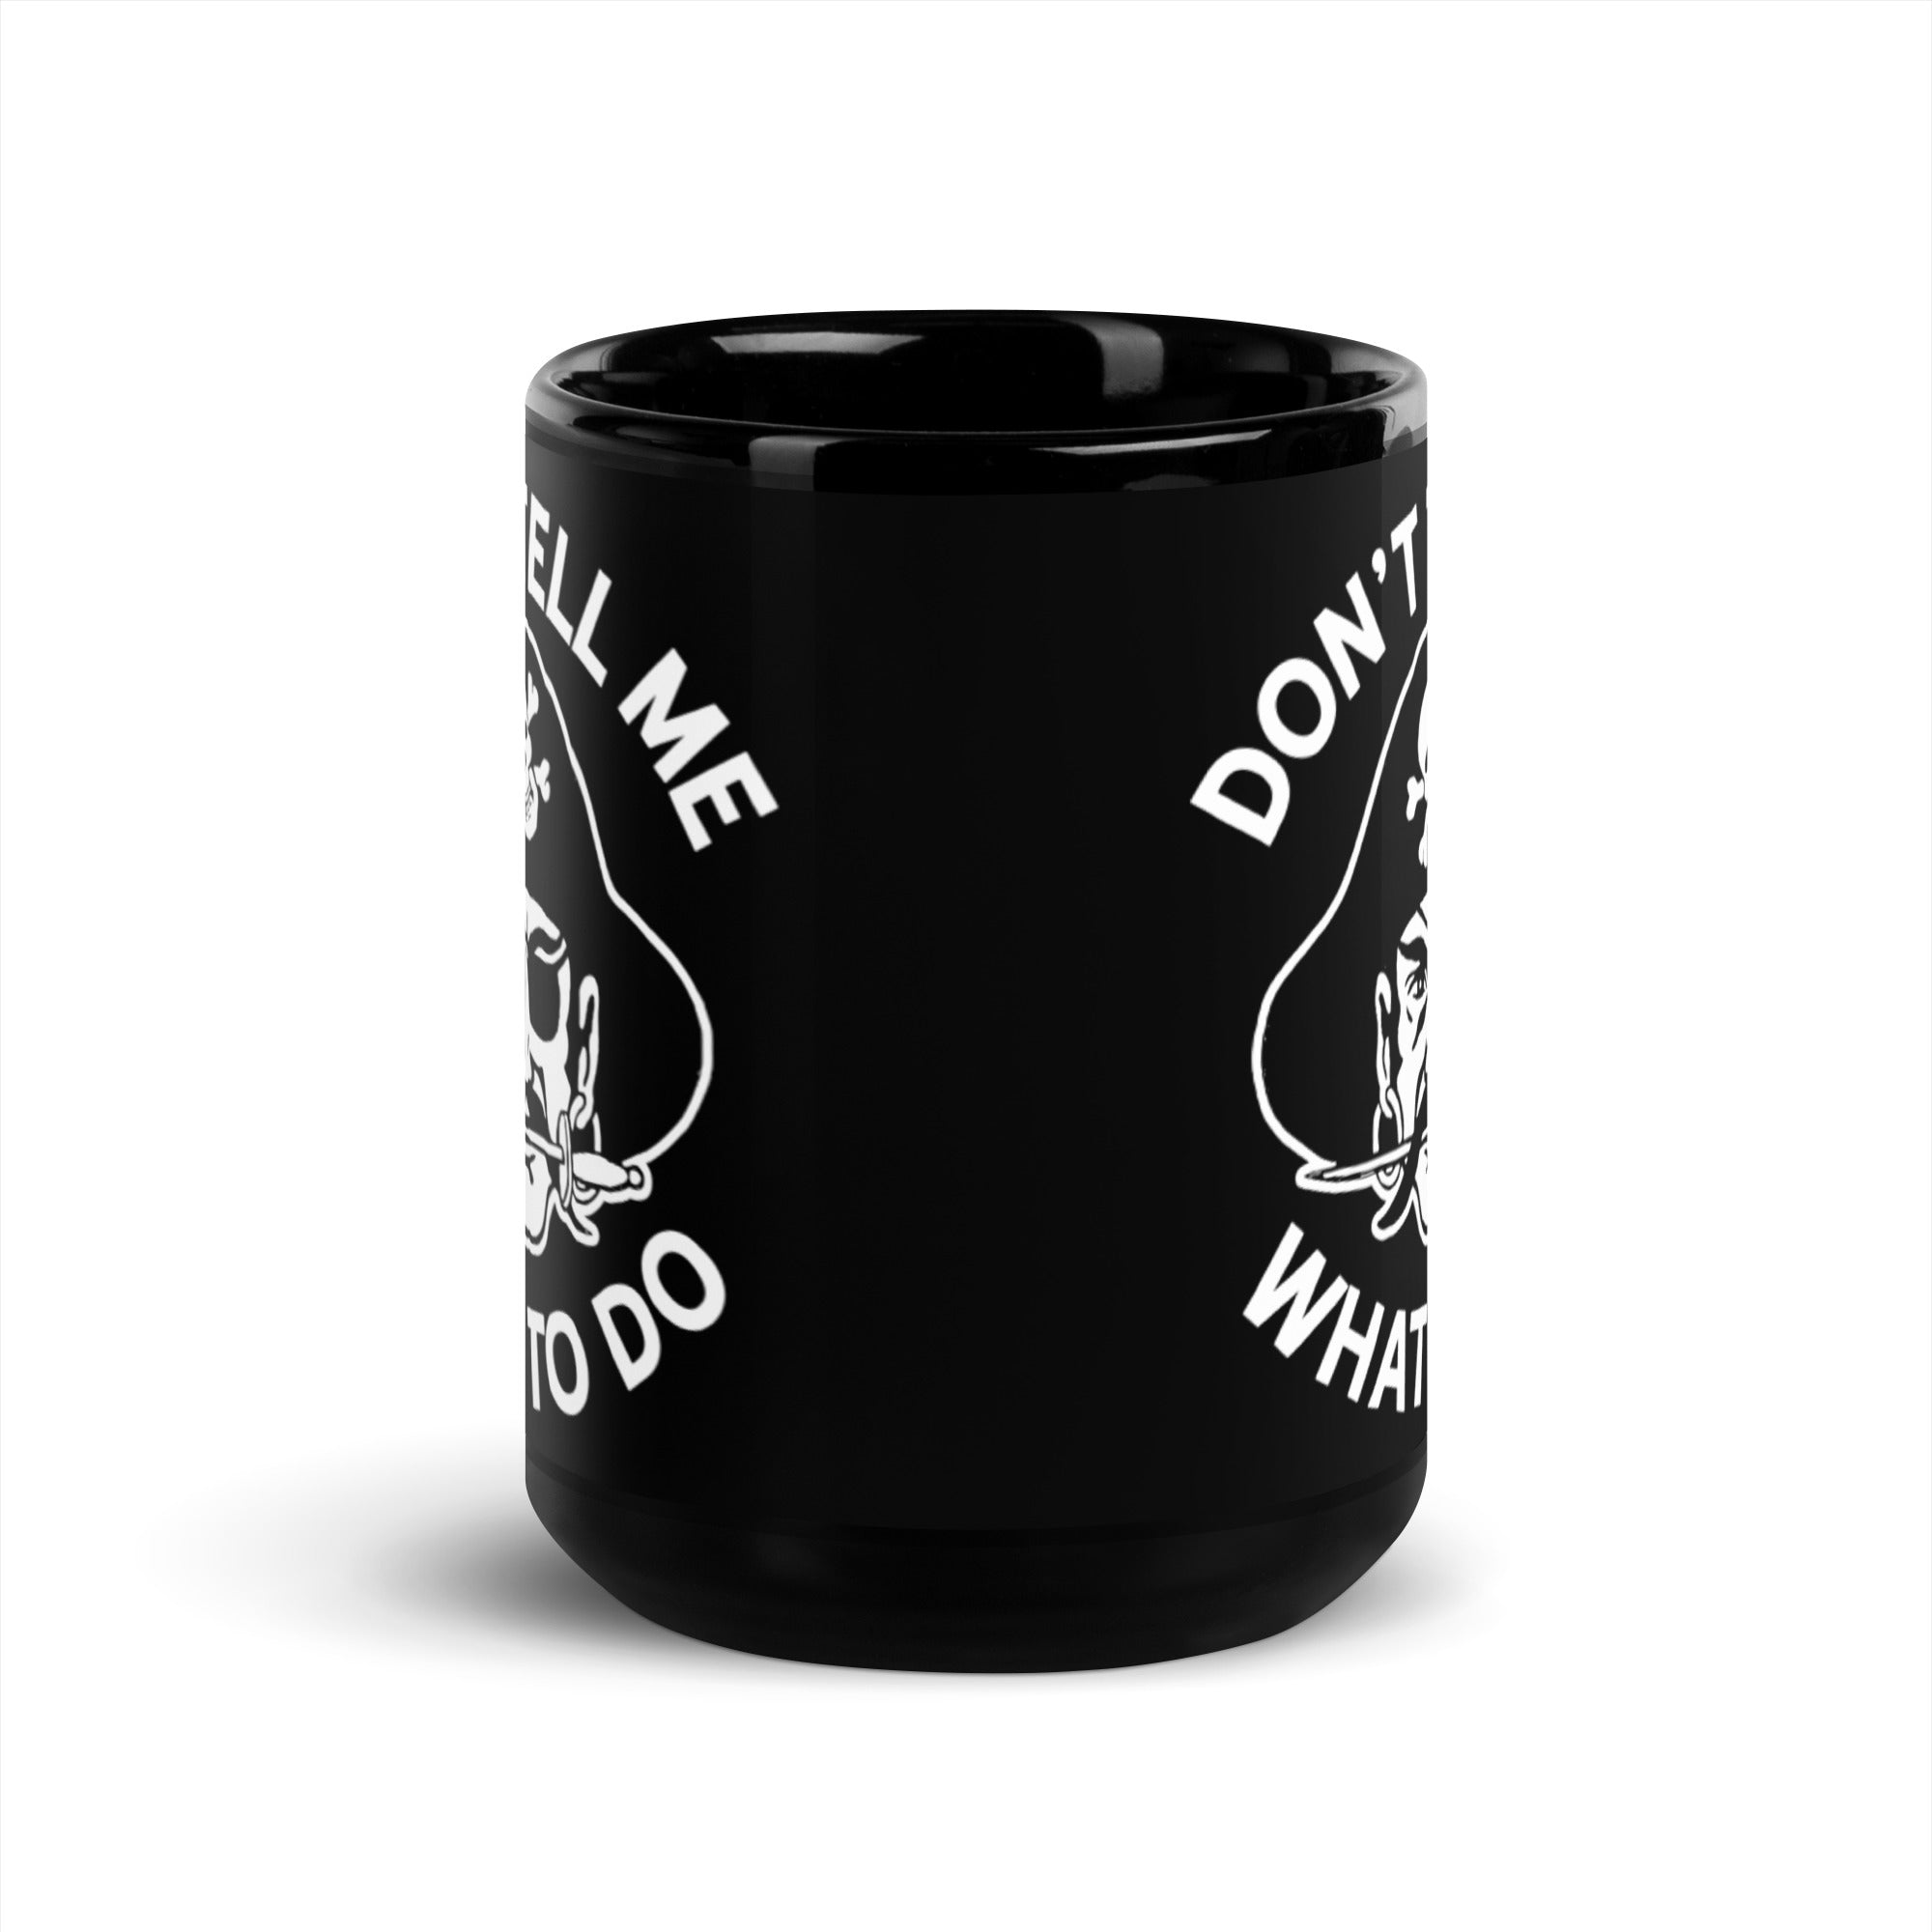 Don't Tell Me What To Do Black Glossy Pirate Mug